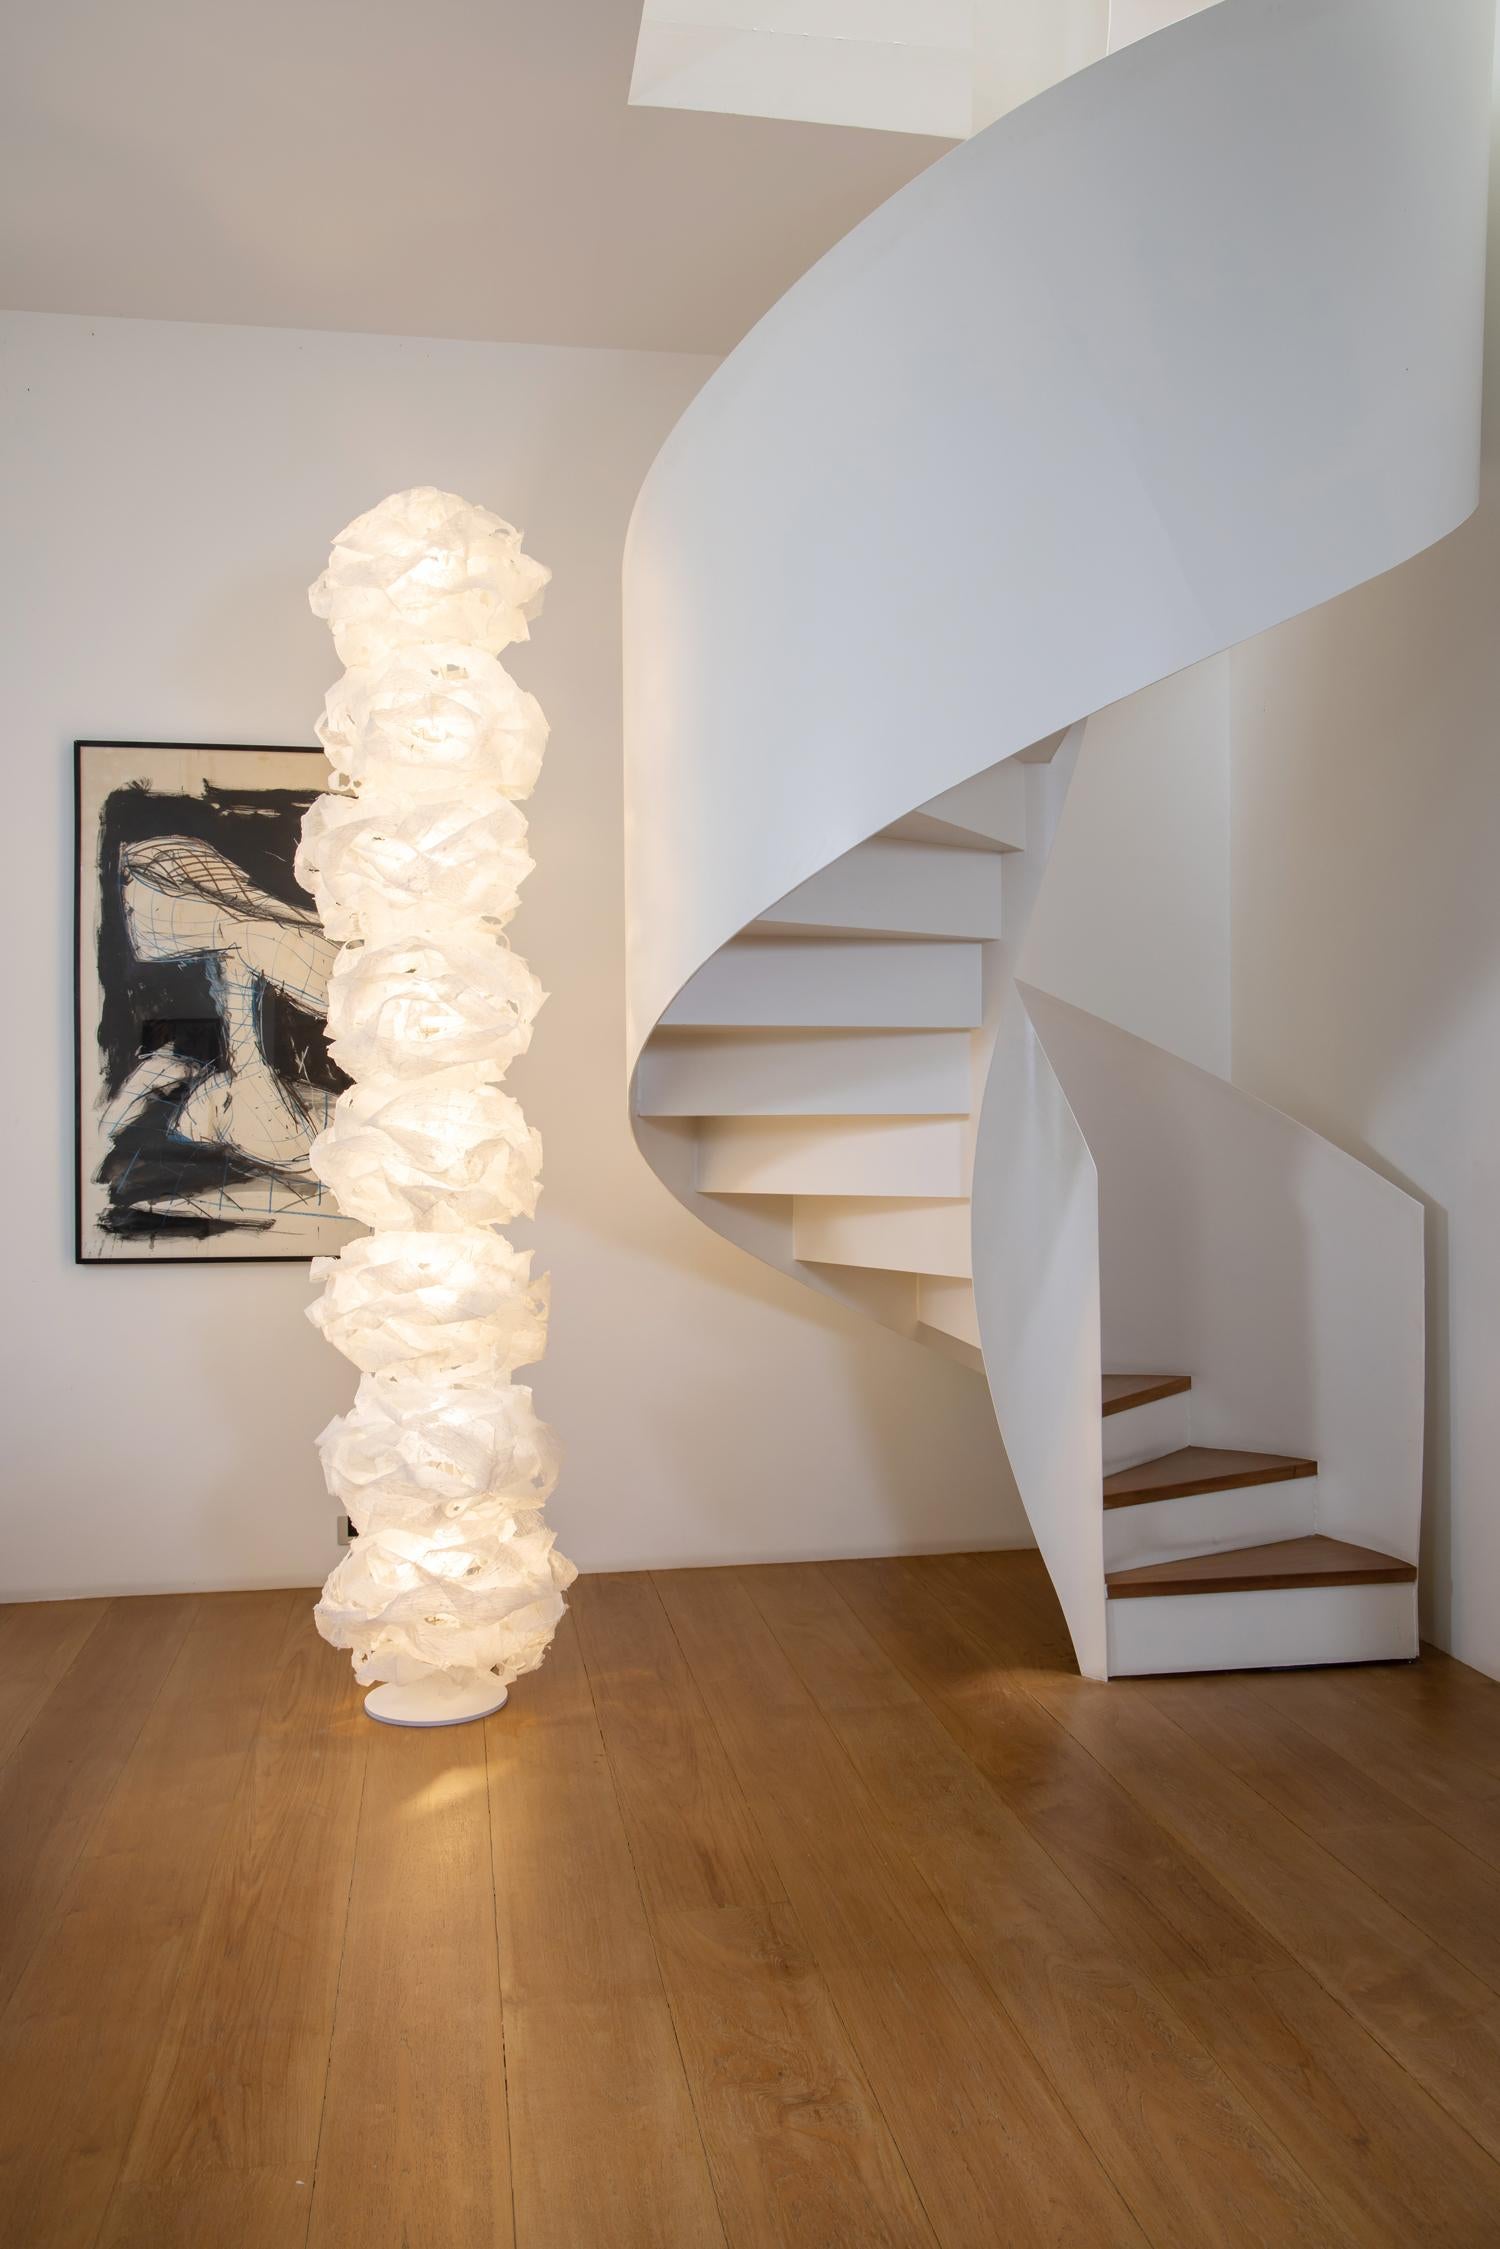 Thai Transcendence tower by Ango, Hand-Crafted Sculptural Floor Light For Sale